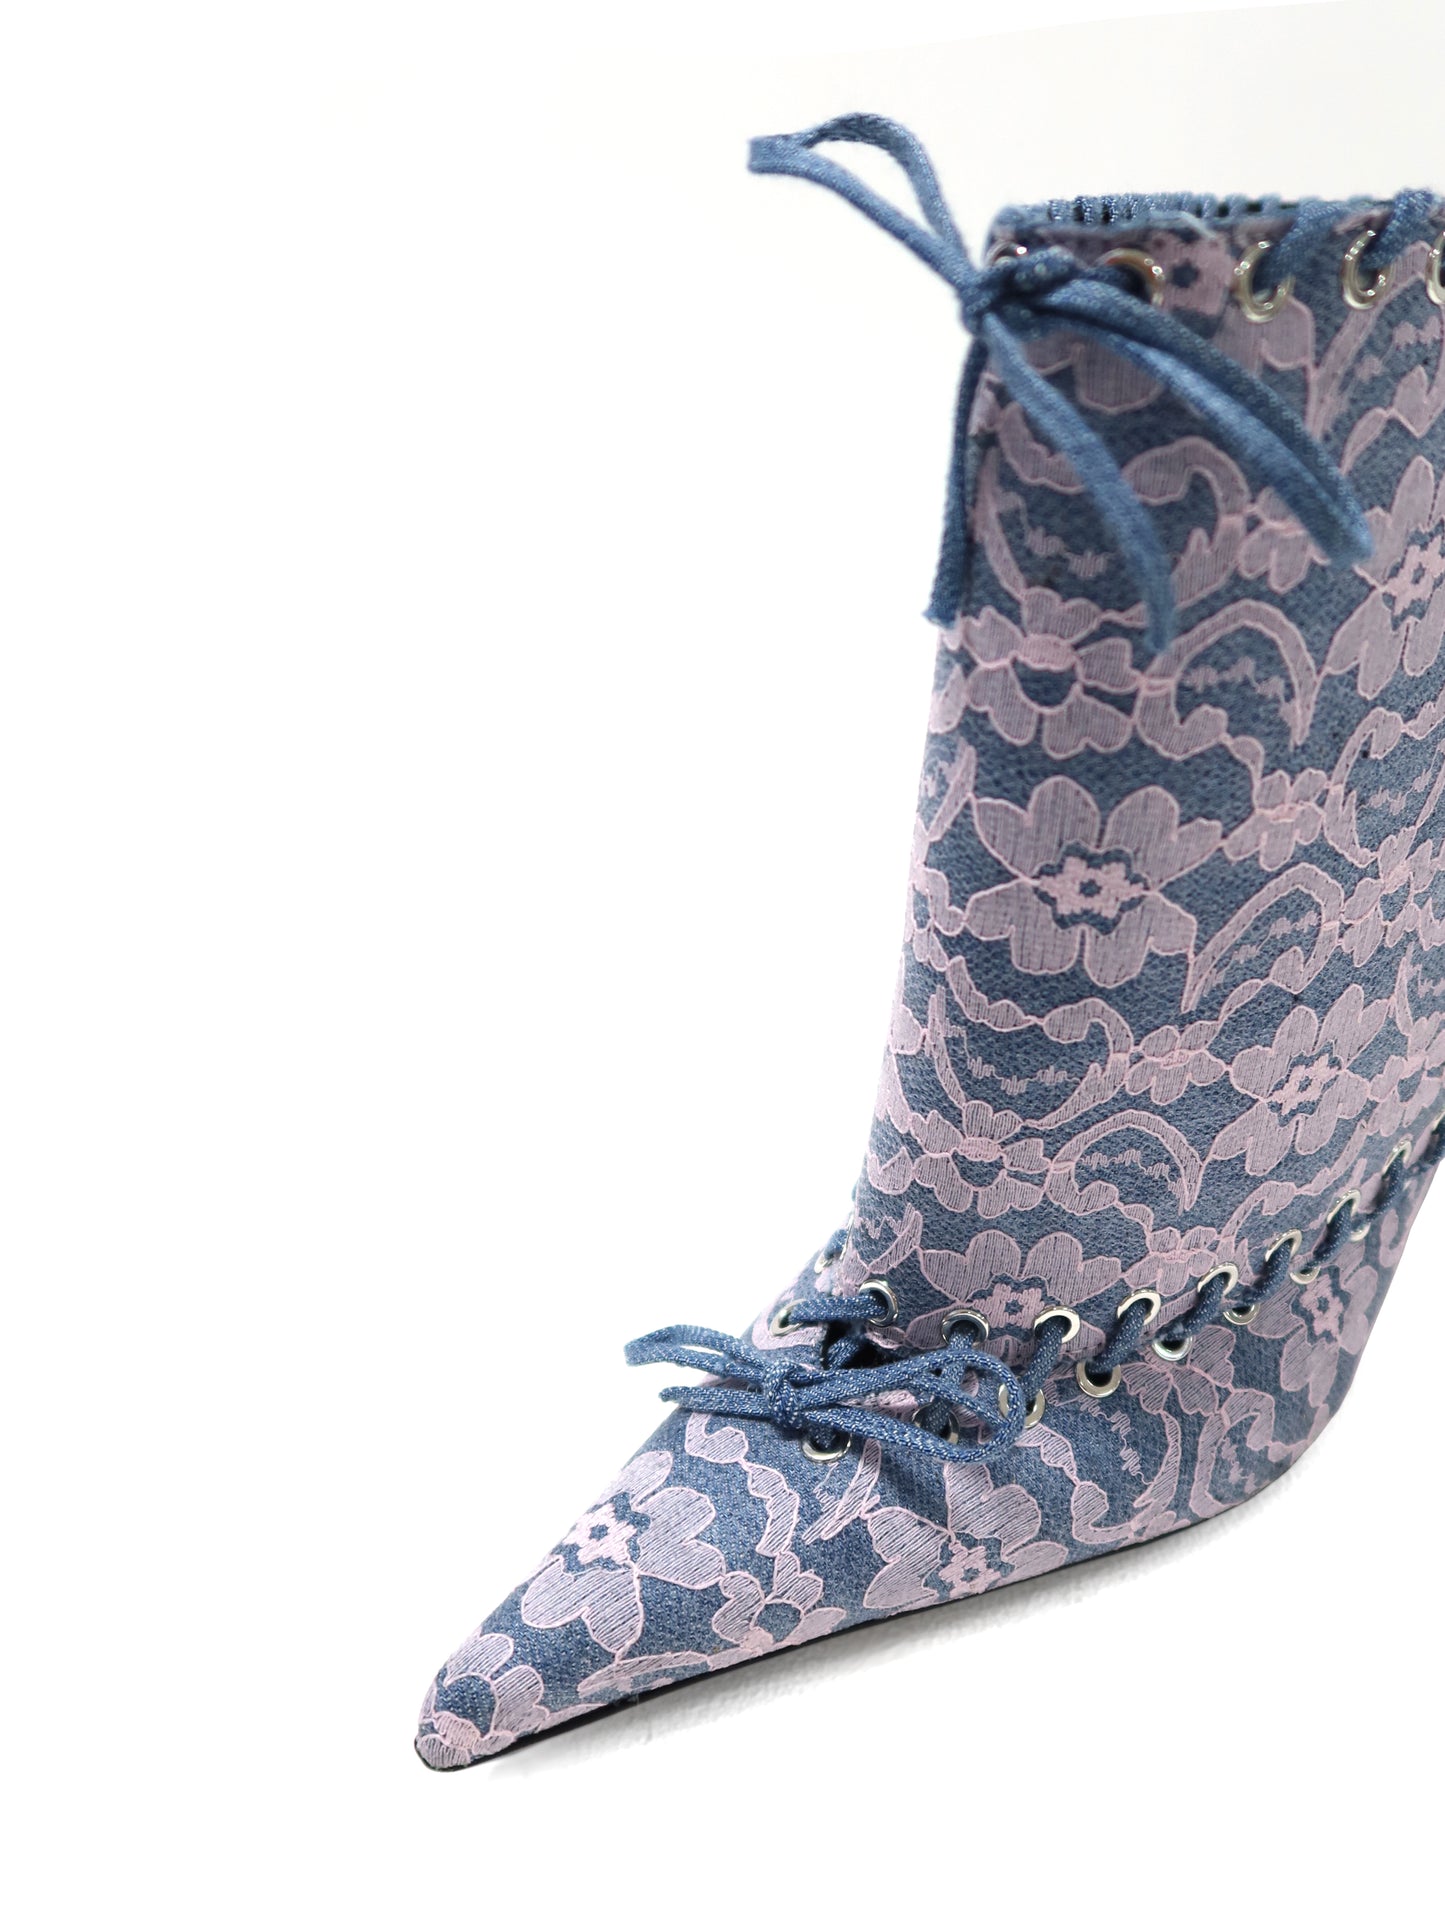 ALL-IN Denim Lace Level Boots